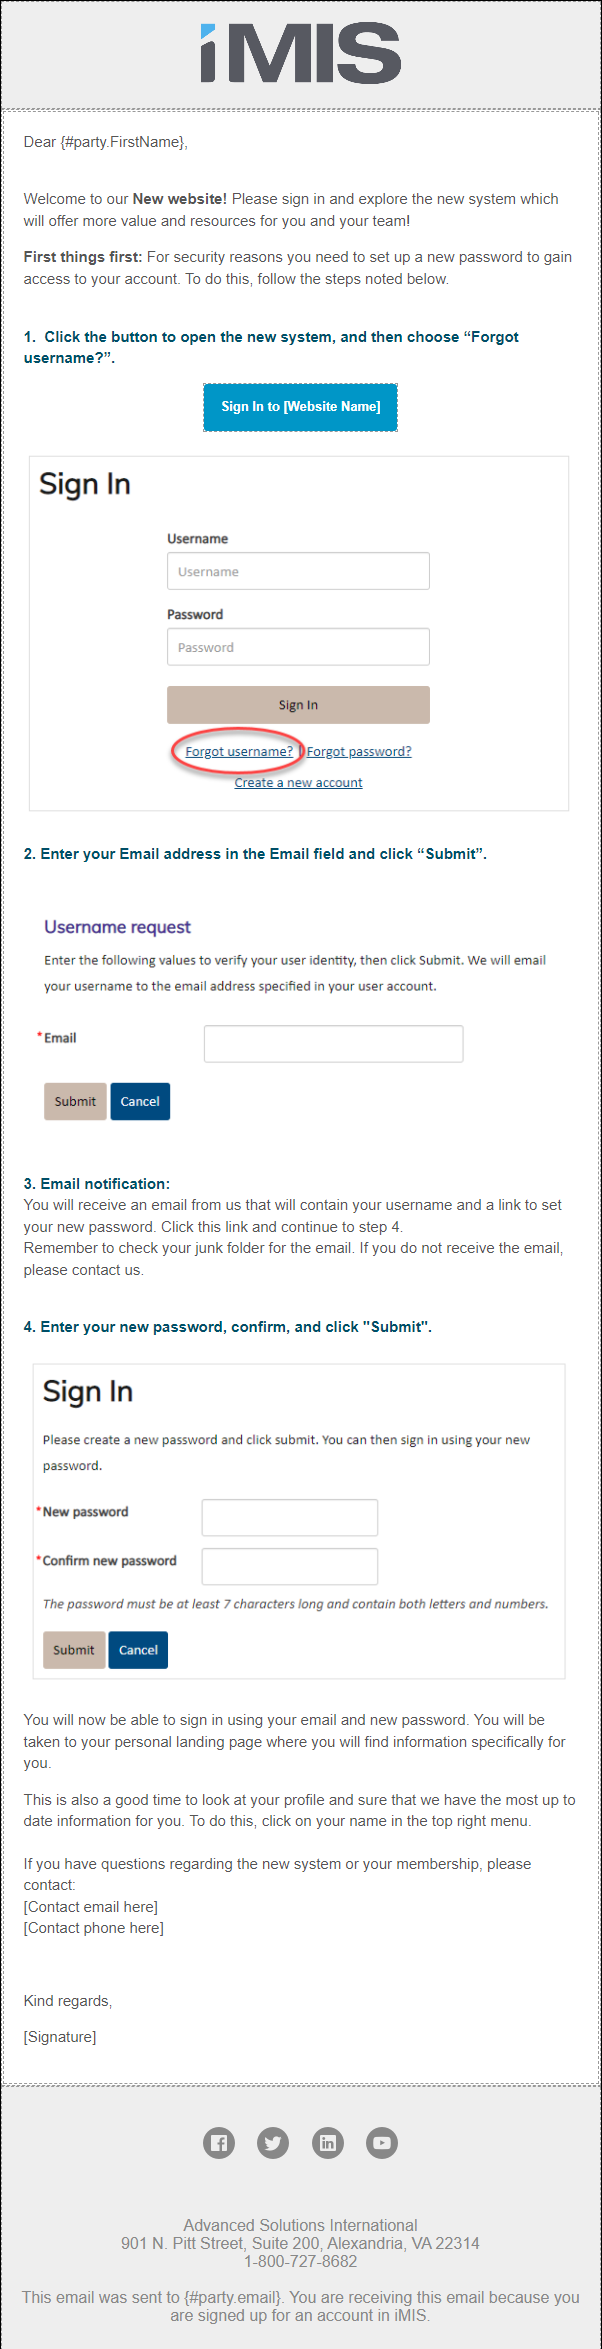 Email template welcoming a user to a new website and guiding them through the password reset process. The template includes a button to access the new system, screenshots of the sign-in page, username request, and password reset form, along with step-by-step instructions. The footer offers contact information and is adorned with social media icons.